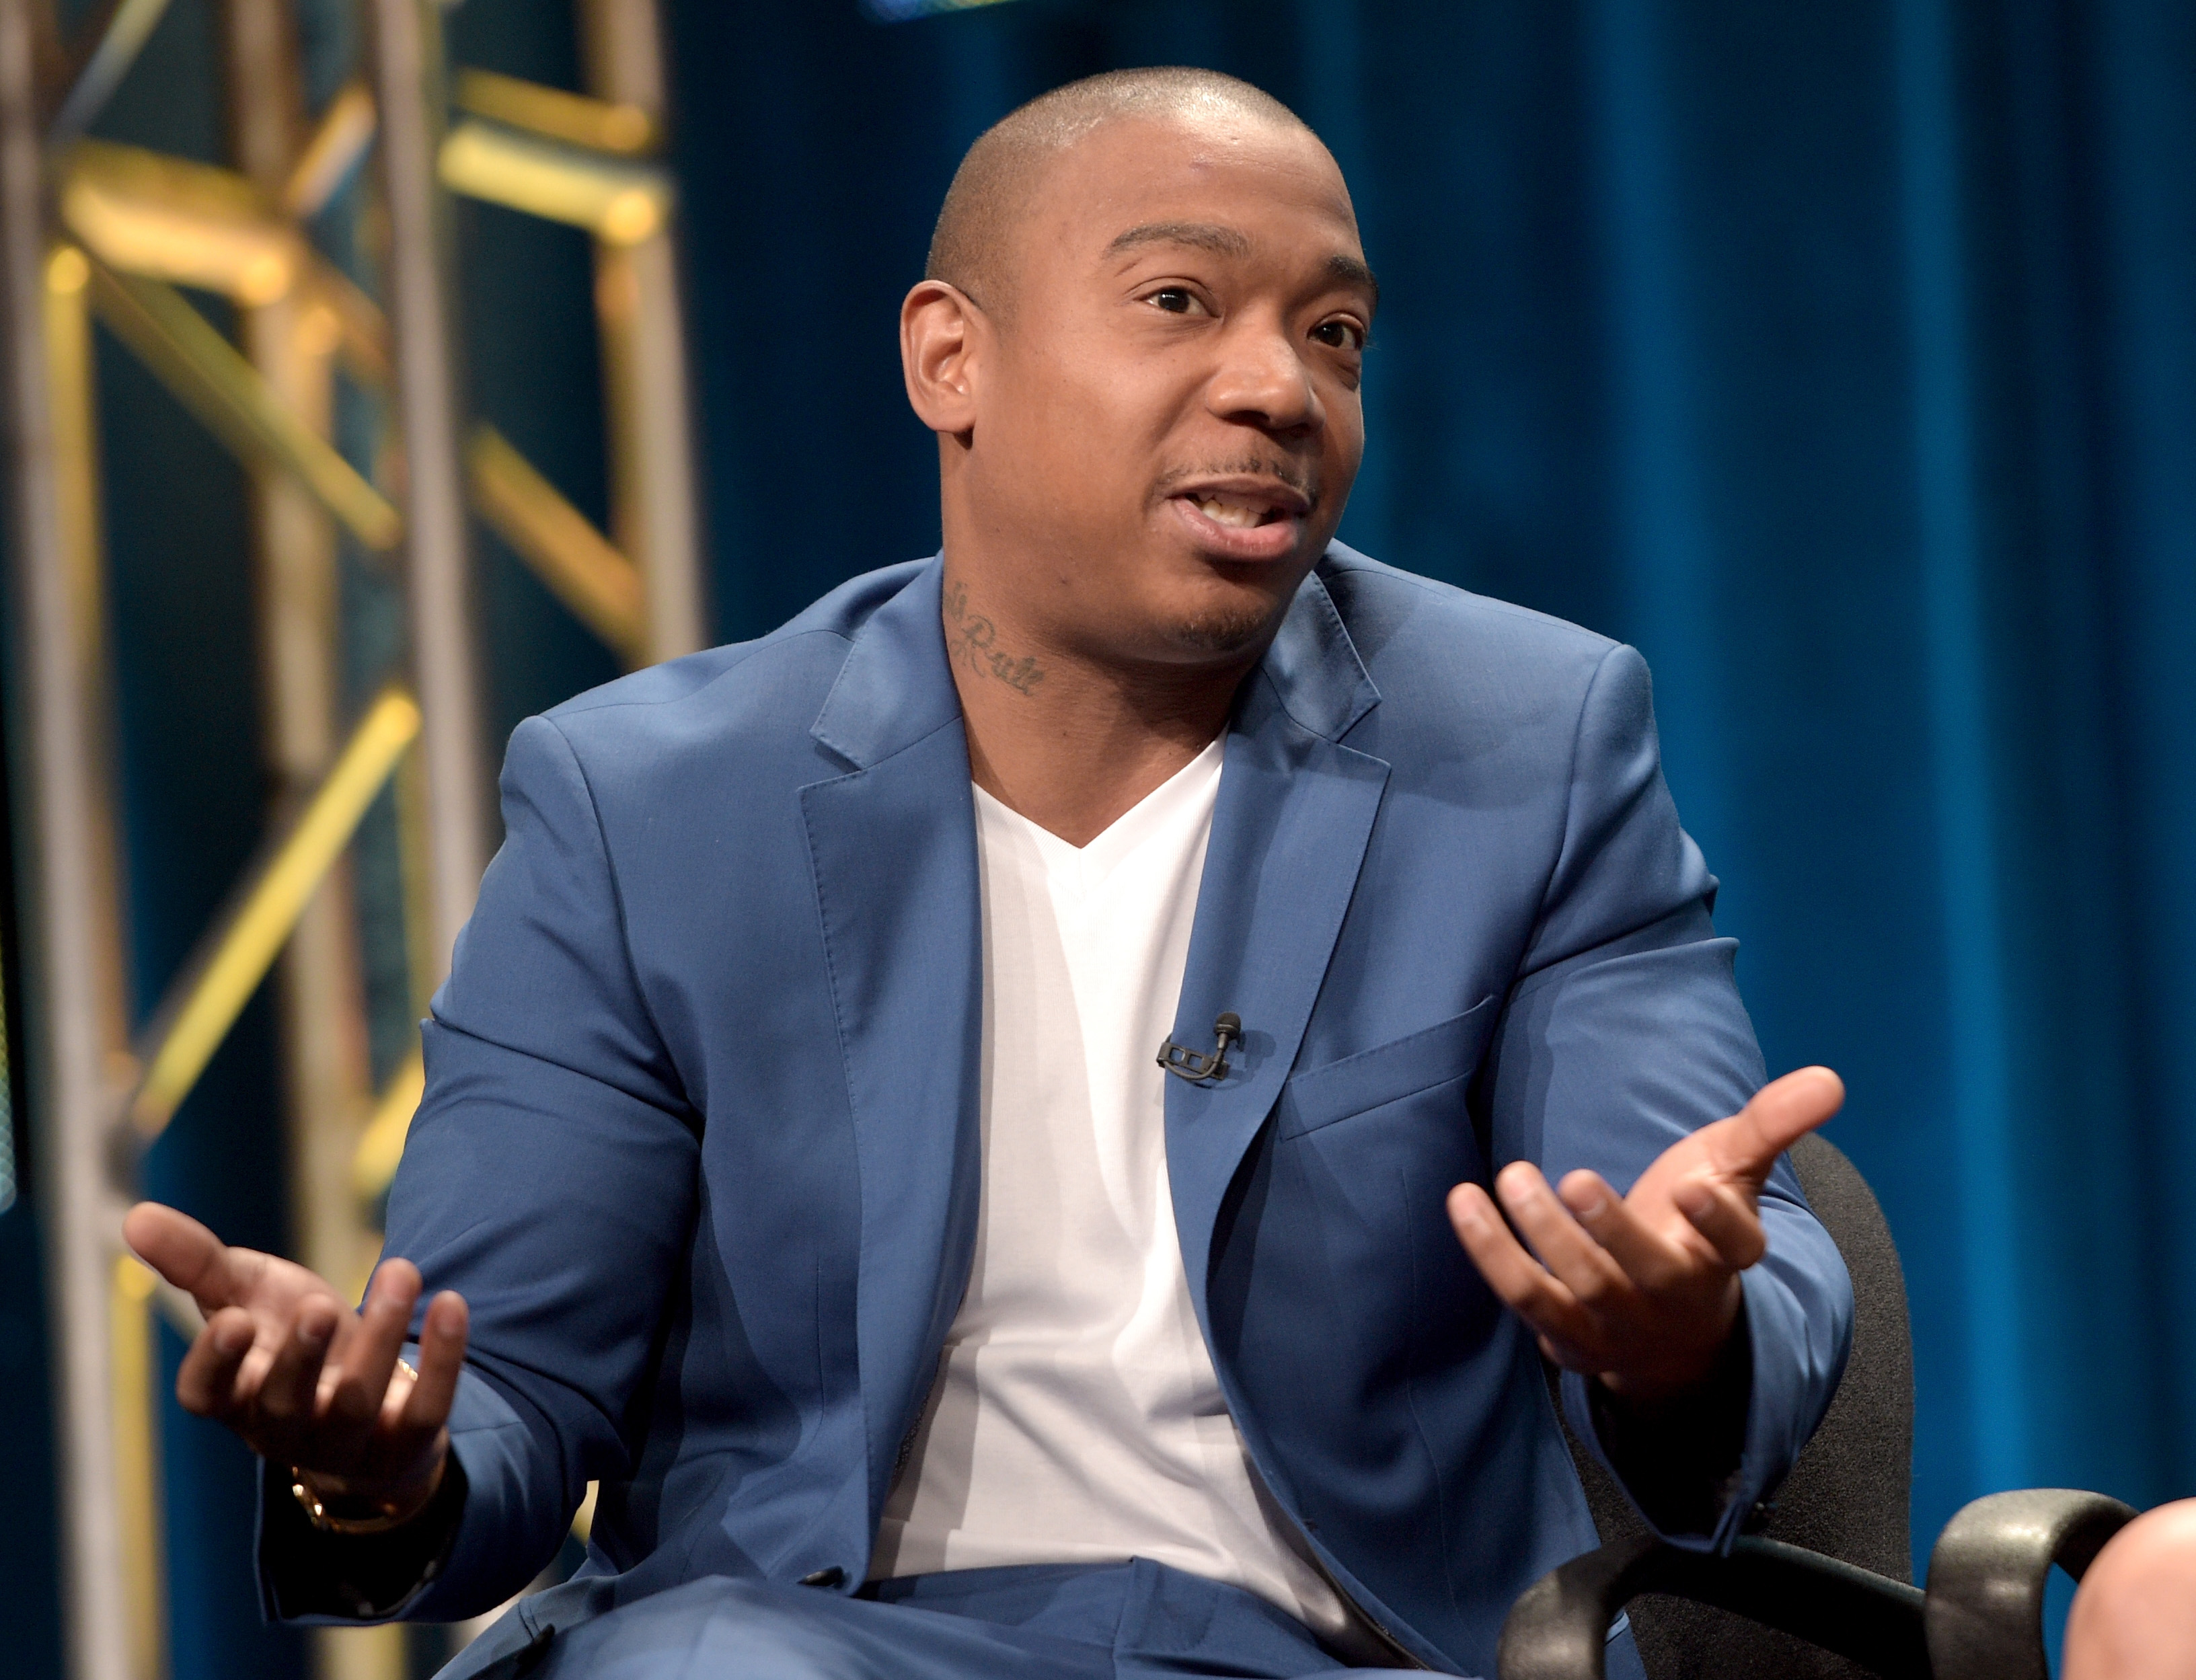 Ja Rule onstage during the Viacom TCA Presentation at The Beverly Hilton Hotel on July 29, 2015 in Beverly Hills, California. (Jason Kempin— Getty Images)